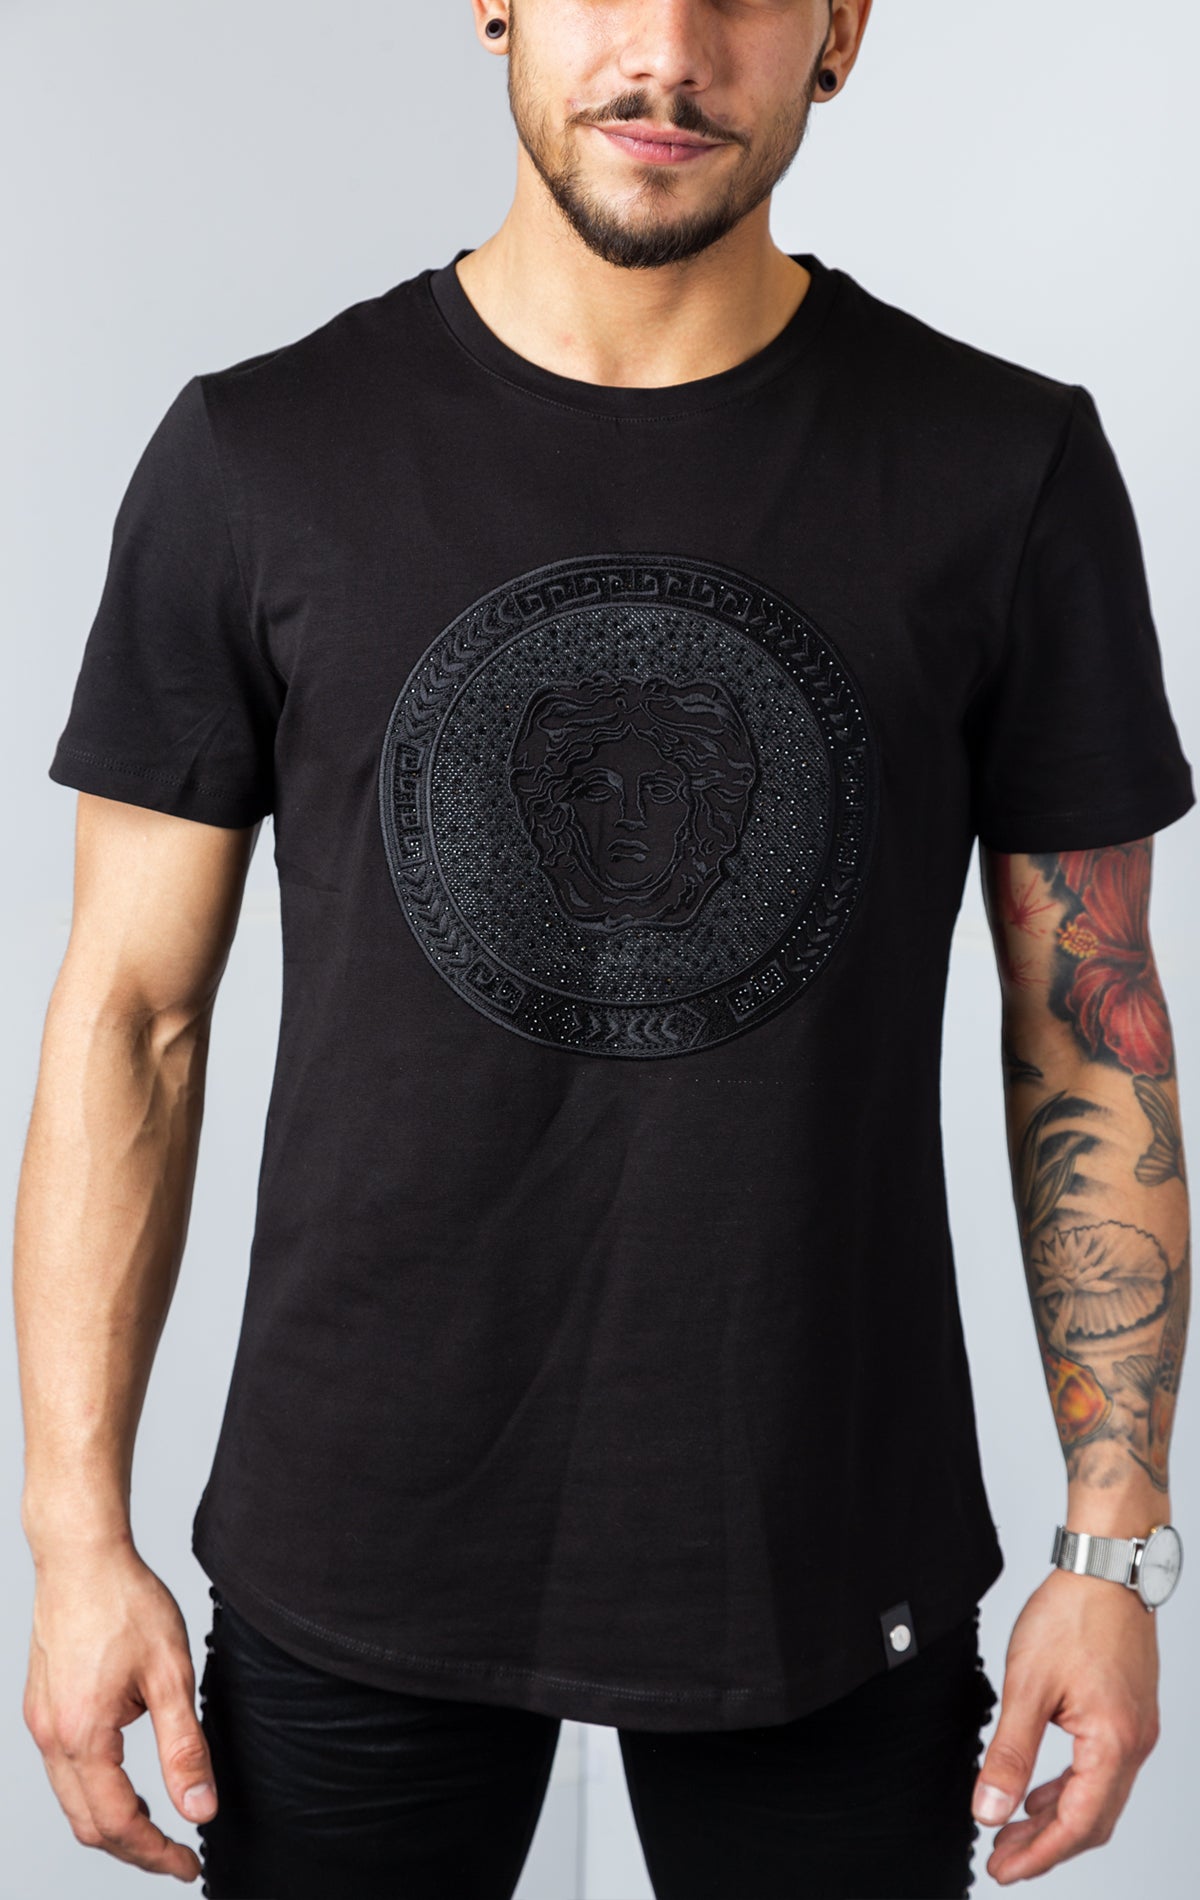 Black T shirt with design in the center